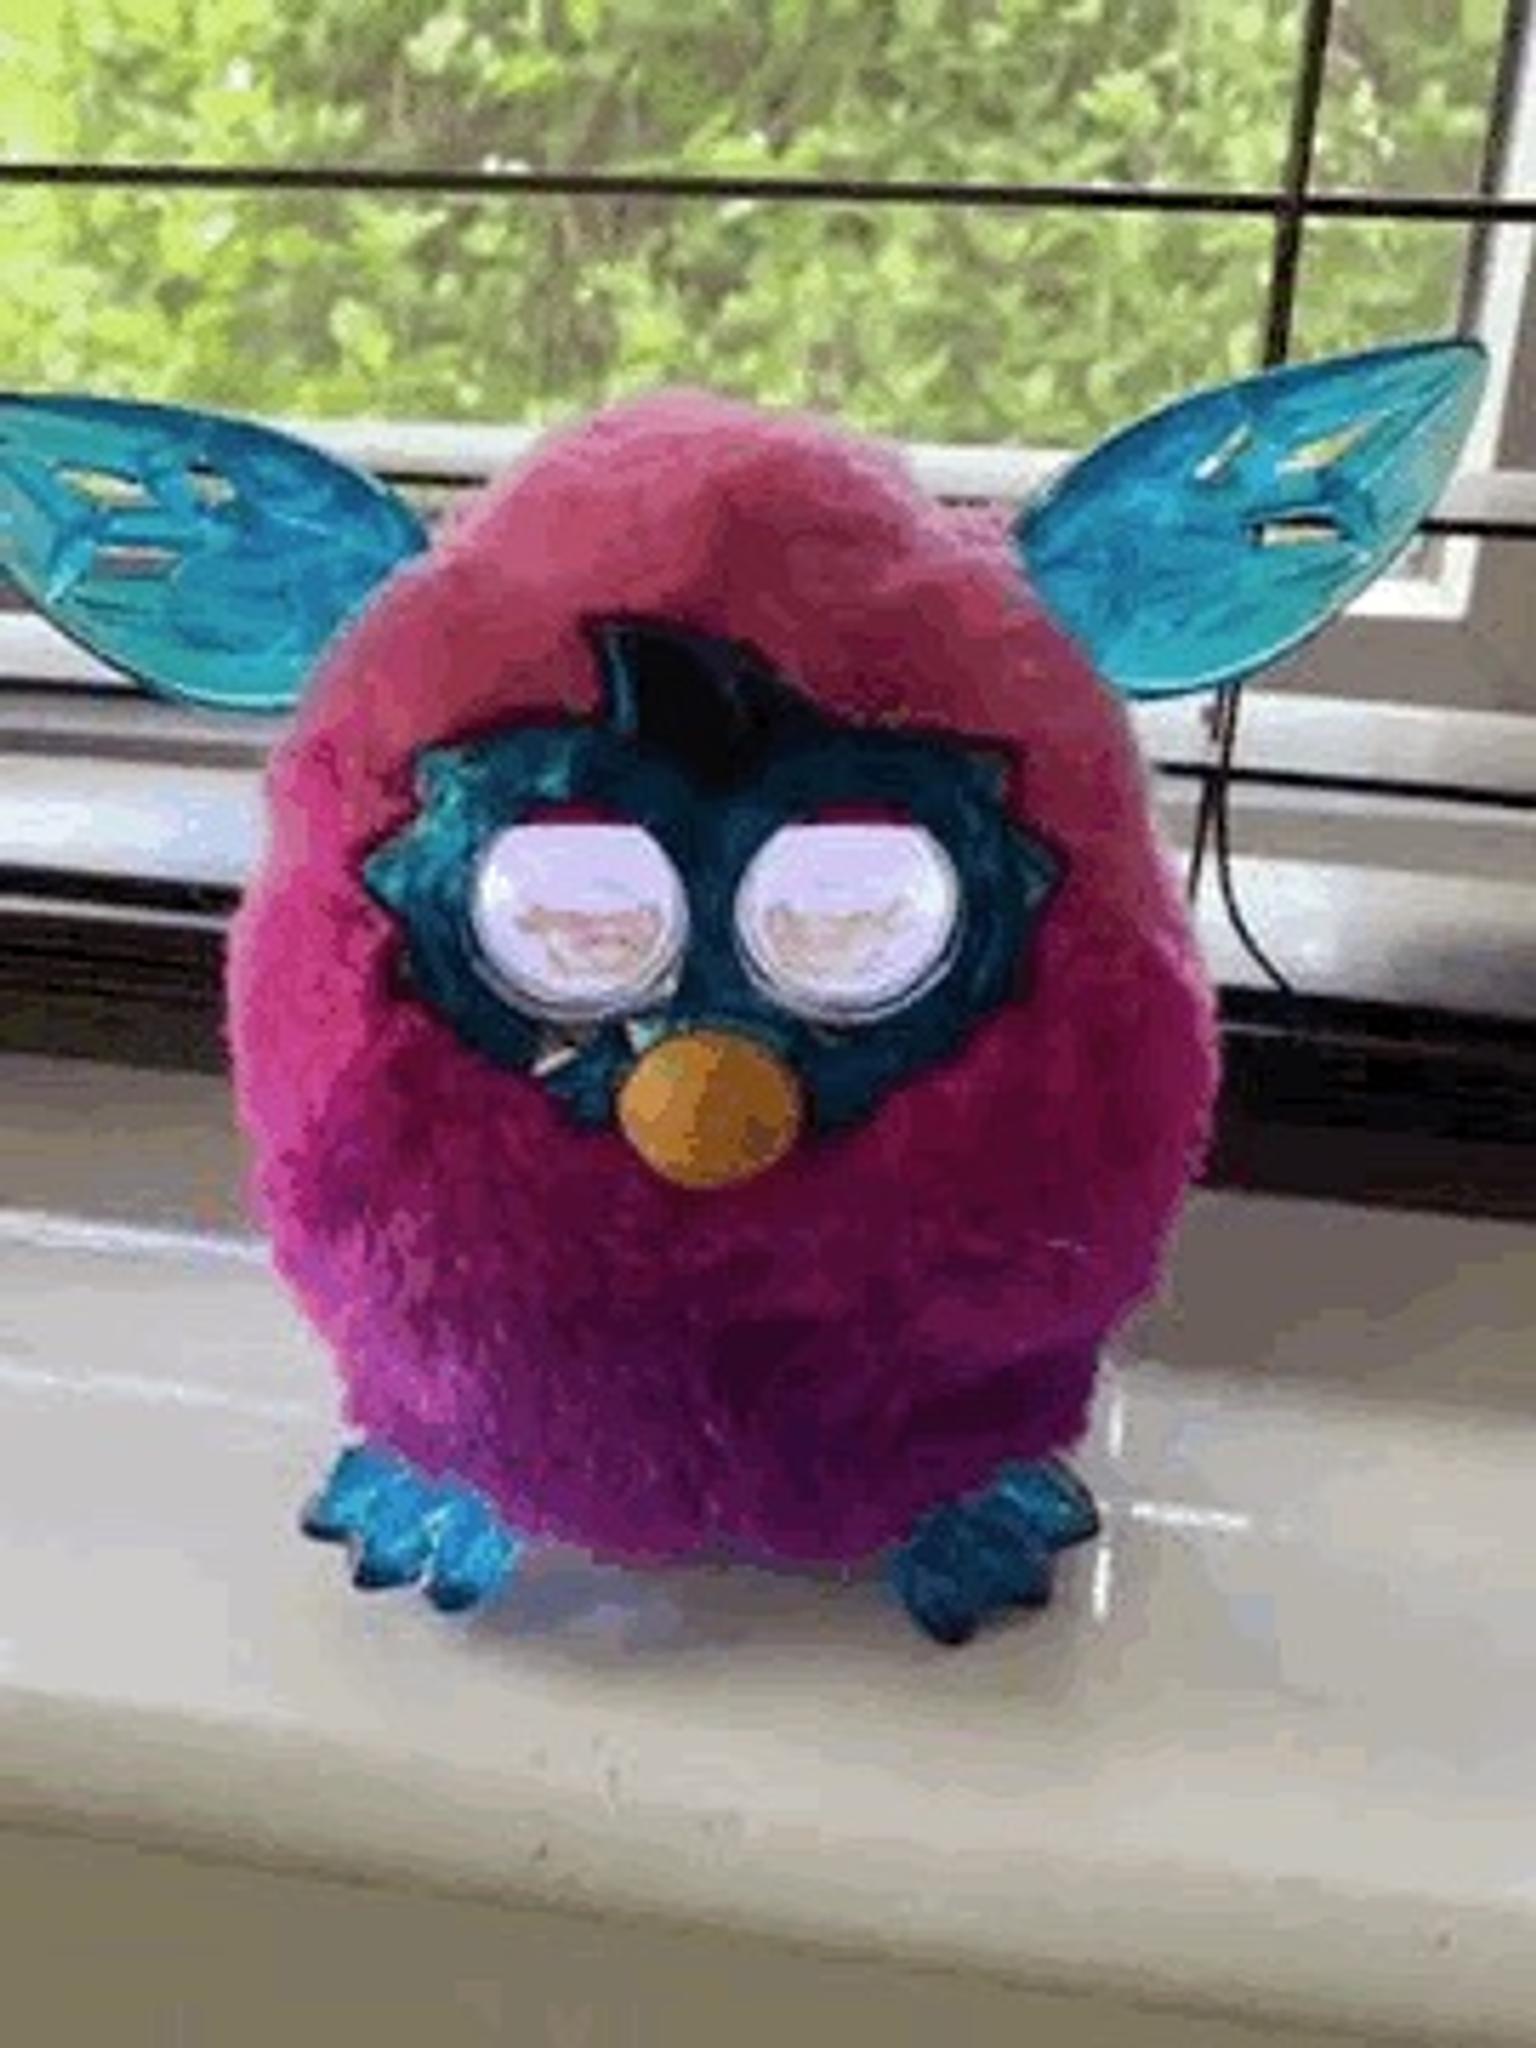 furby interactive toy